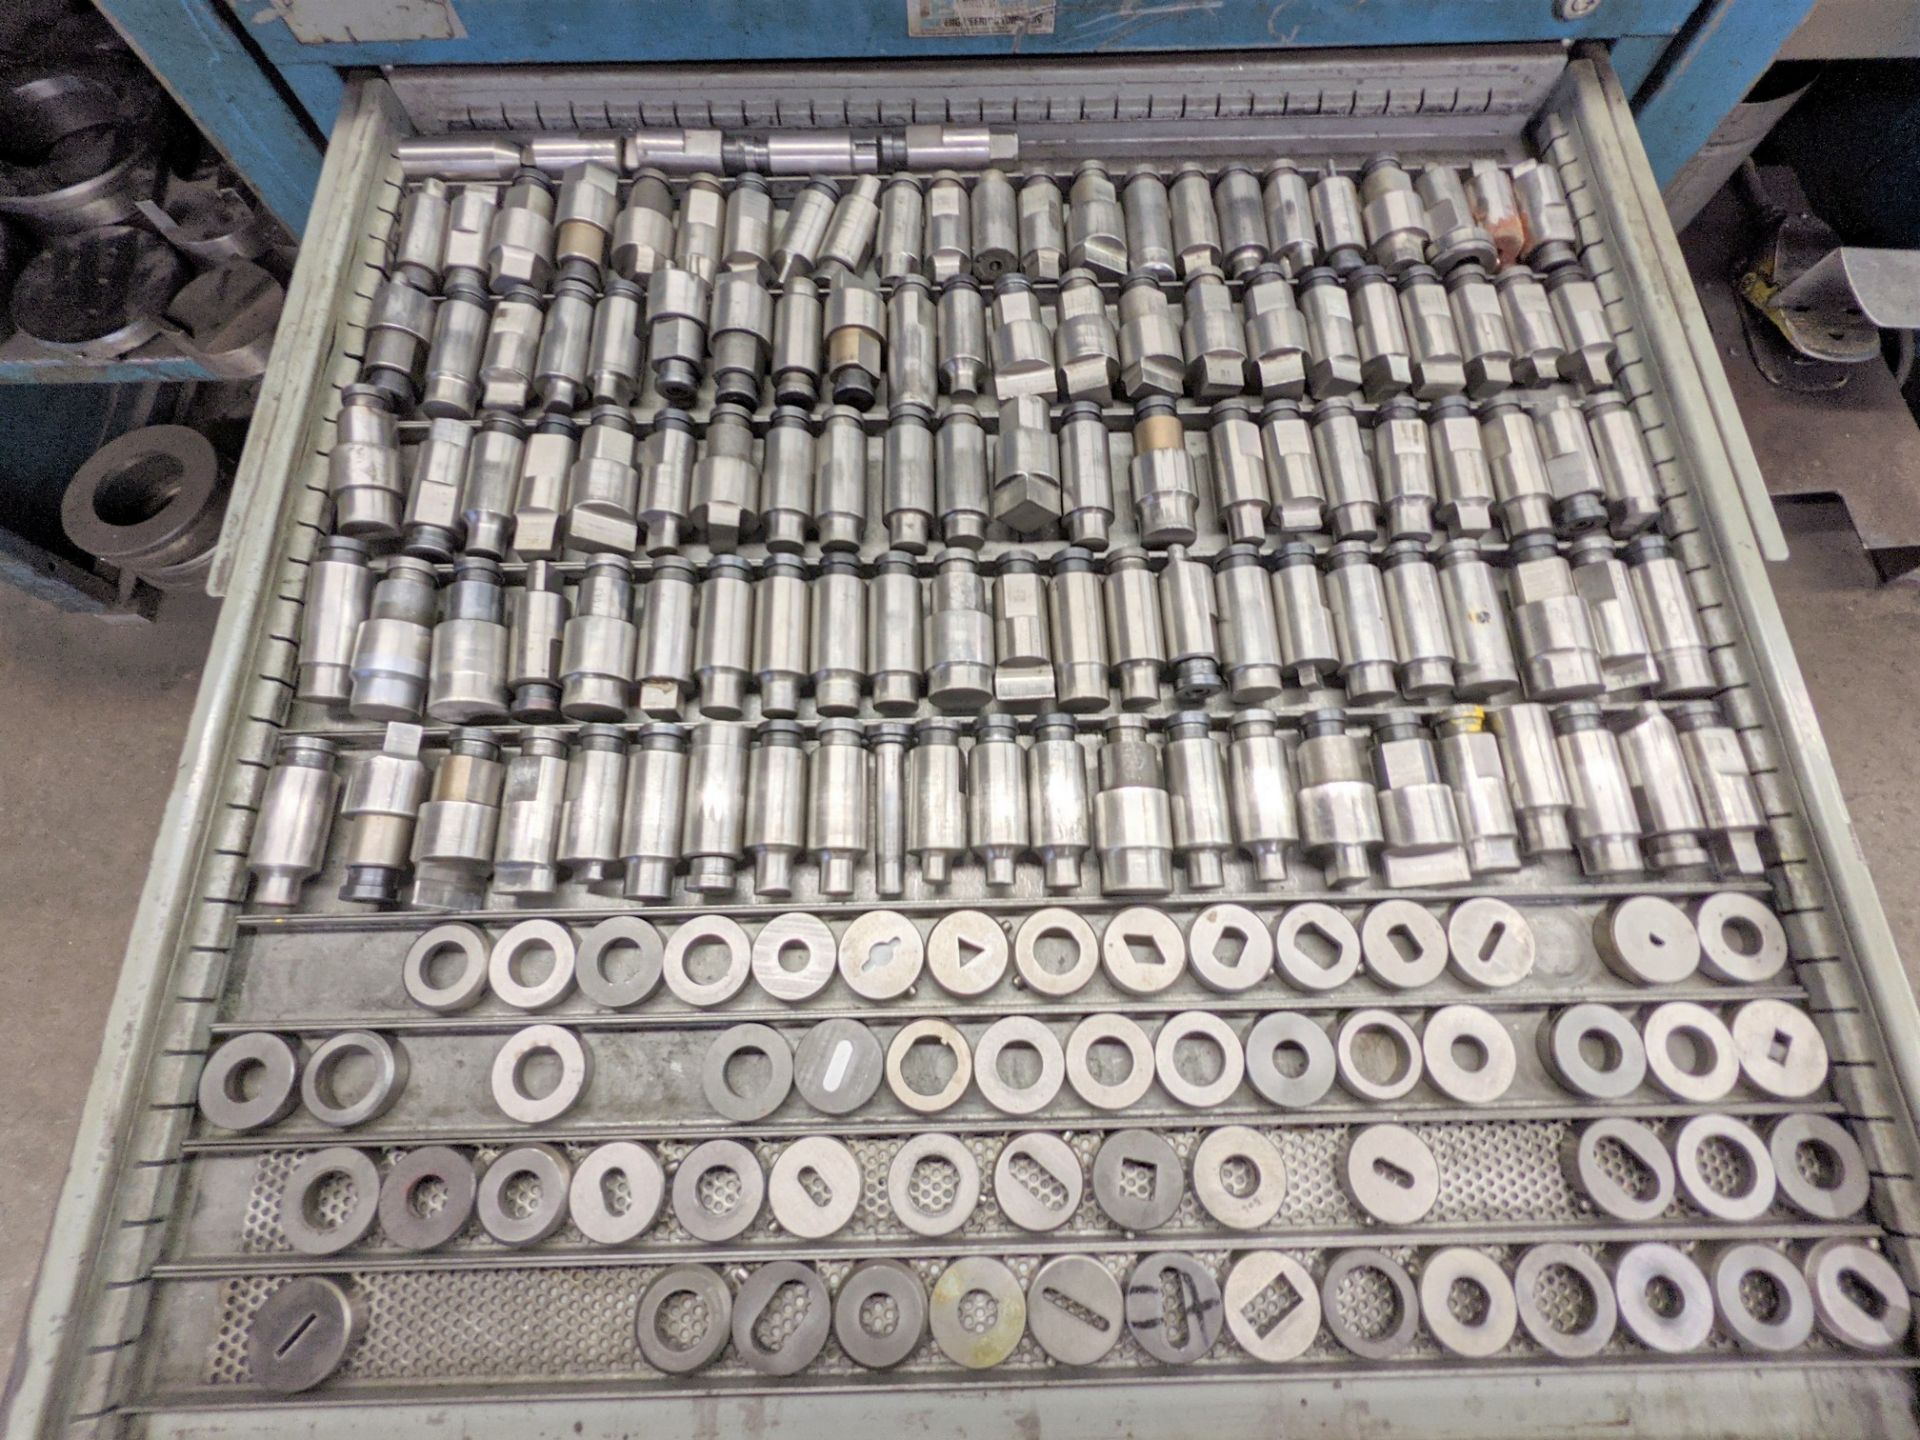 PIERCE-ALL 50-TON CAP. PERF-O-MATOR 3055 PUNCH, S/N 7812326 W/ LARGE ASSORTMENT OF PUNCH DIES - Image 17 of 40